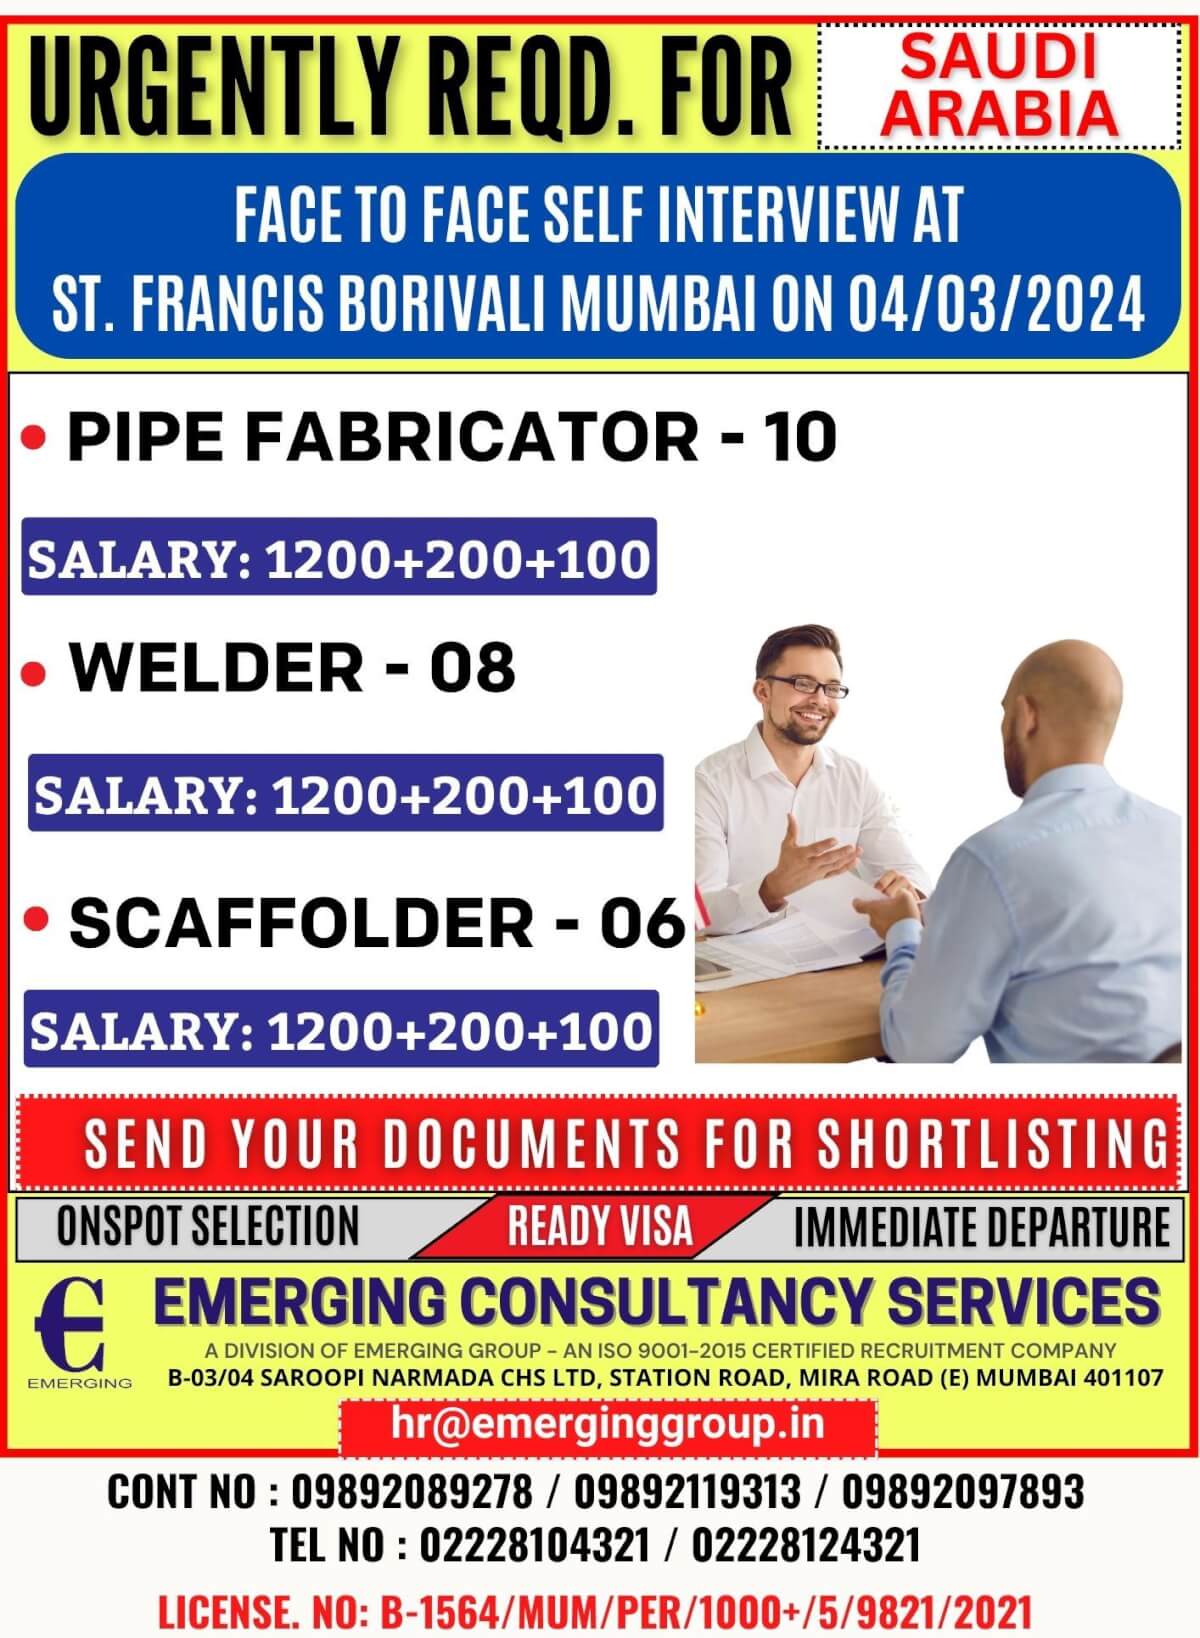 Face to Face Self Interview at ST. FRANCIS BORIVALI MUMBAI ON 04/03/2024